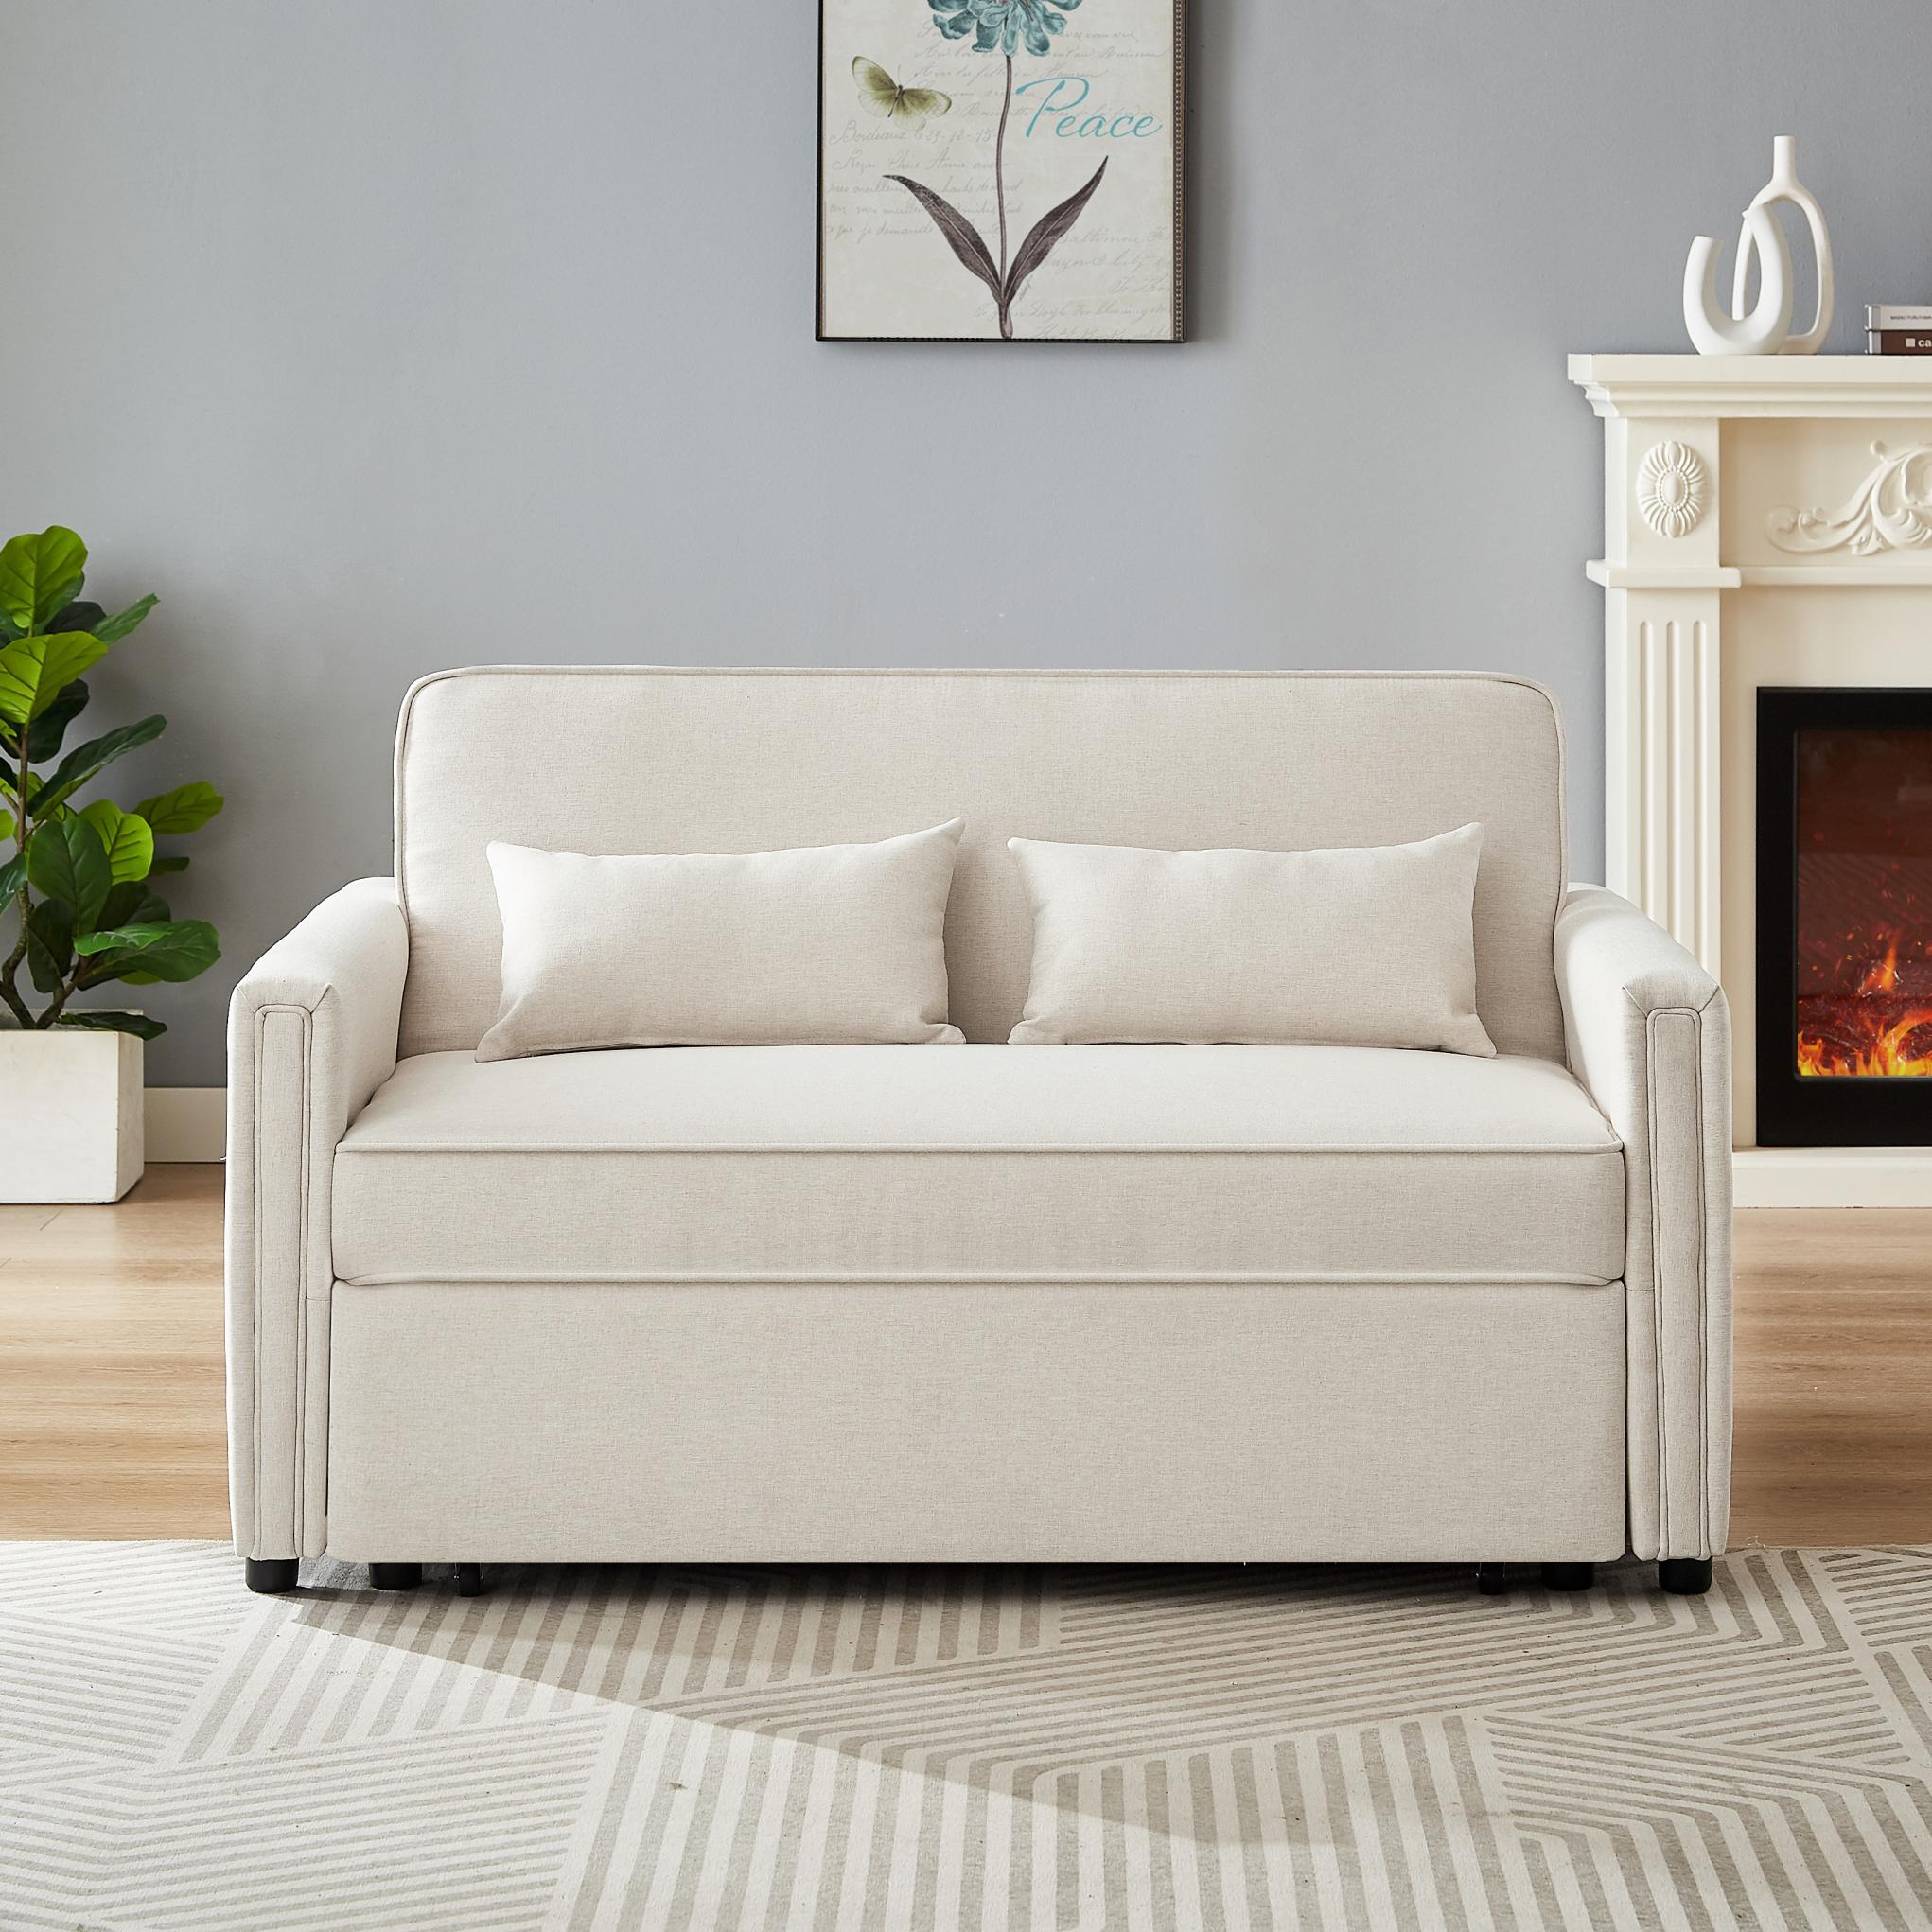 Modern linen double-seater sofa with adjustable backrest, variable sofa bed with 2 lumbar pillows, suitable for a wide range of applications